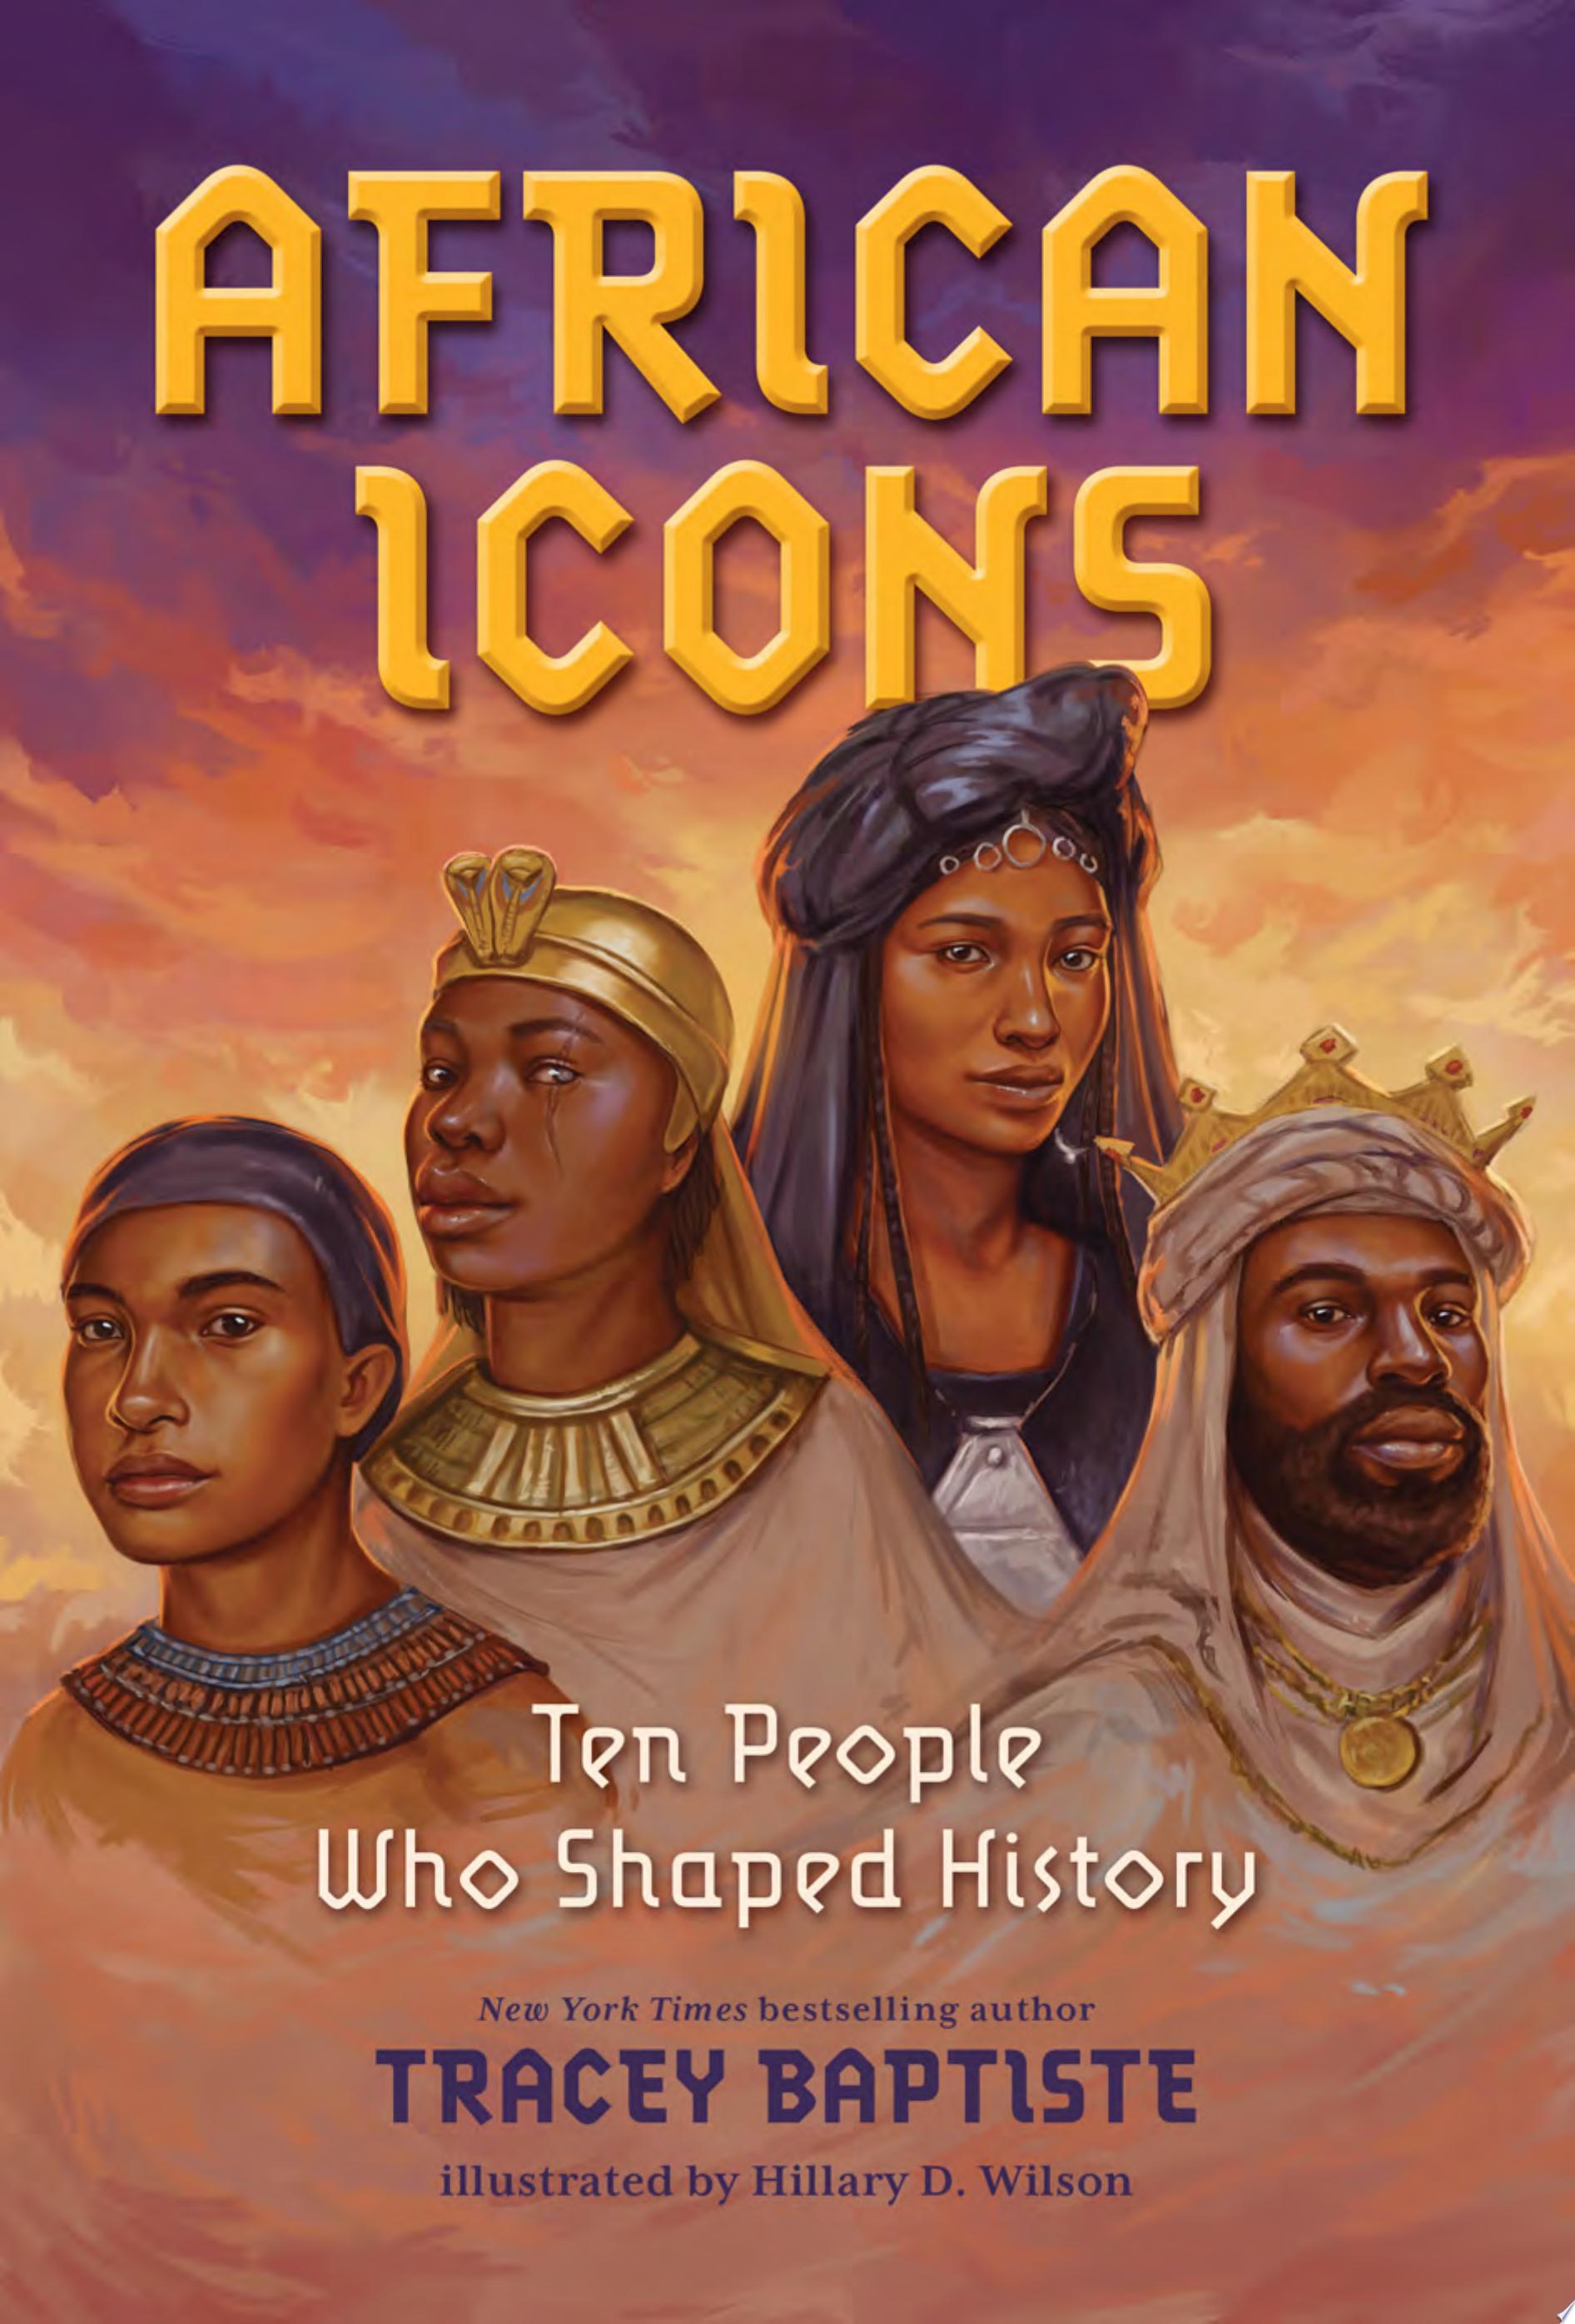 Image for "African Icons"